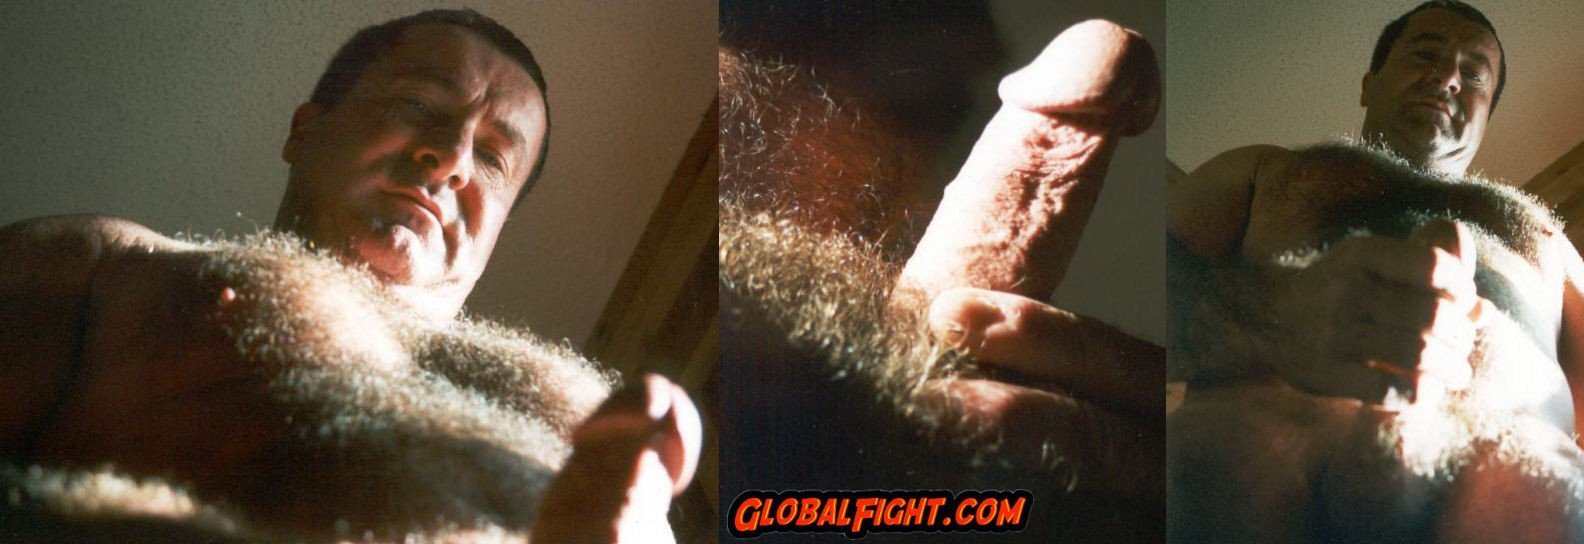 Watch the Photo by Hairy Musclebears with the username @hairymusclebears, posted on February 16, 2023. The post is about the topic Carolina Jim Musclebear. and the text says 'Hairybear Nude Bondage Dad VIEW THE HD PICS from this shoot on his page GLOBALFIGHT com  --  #gaydare #HairyChested #hairyhunk #hairytrail #hairymale #HairyNSFW #nsfwtwt #dads #daddynsfw #masculinity #MachoAlfa #machosgay #AlphaBoys #gay #gaybear..'